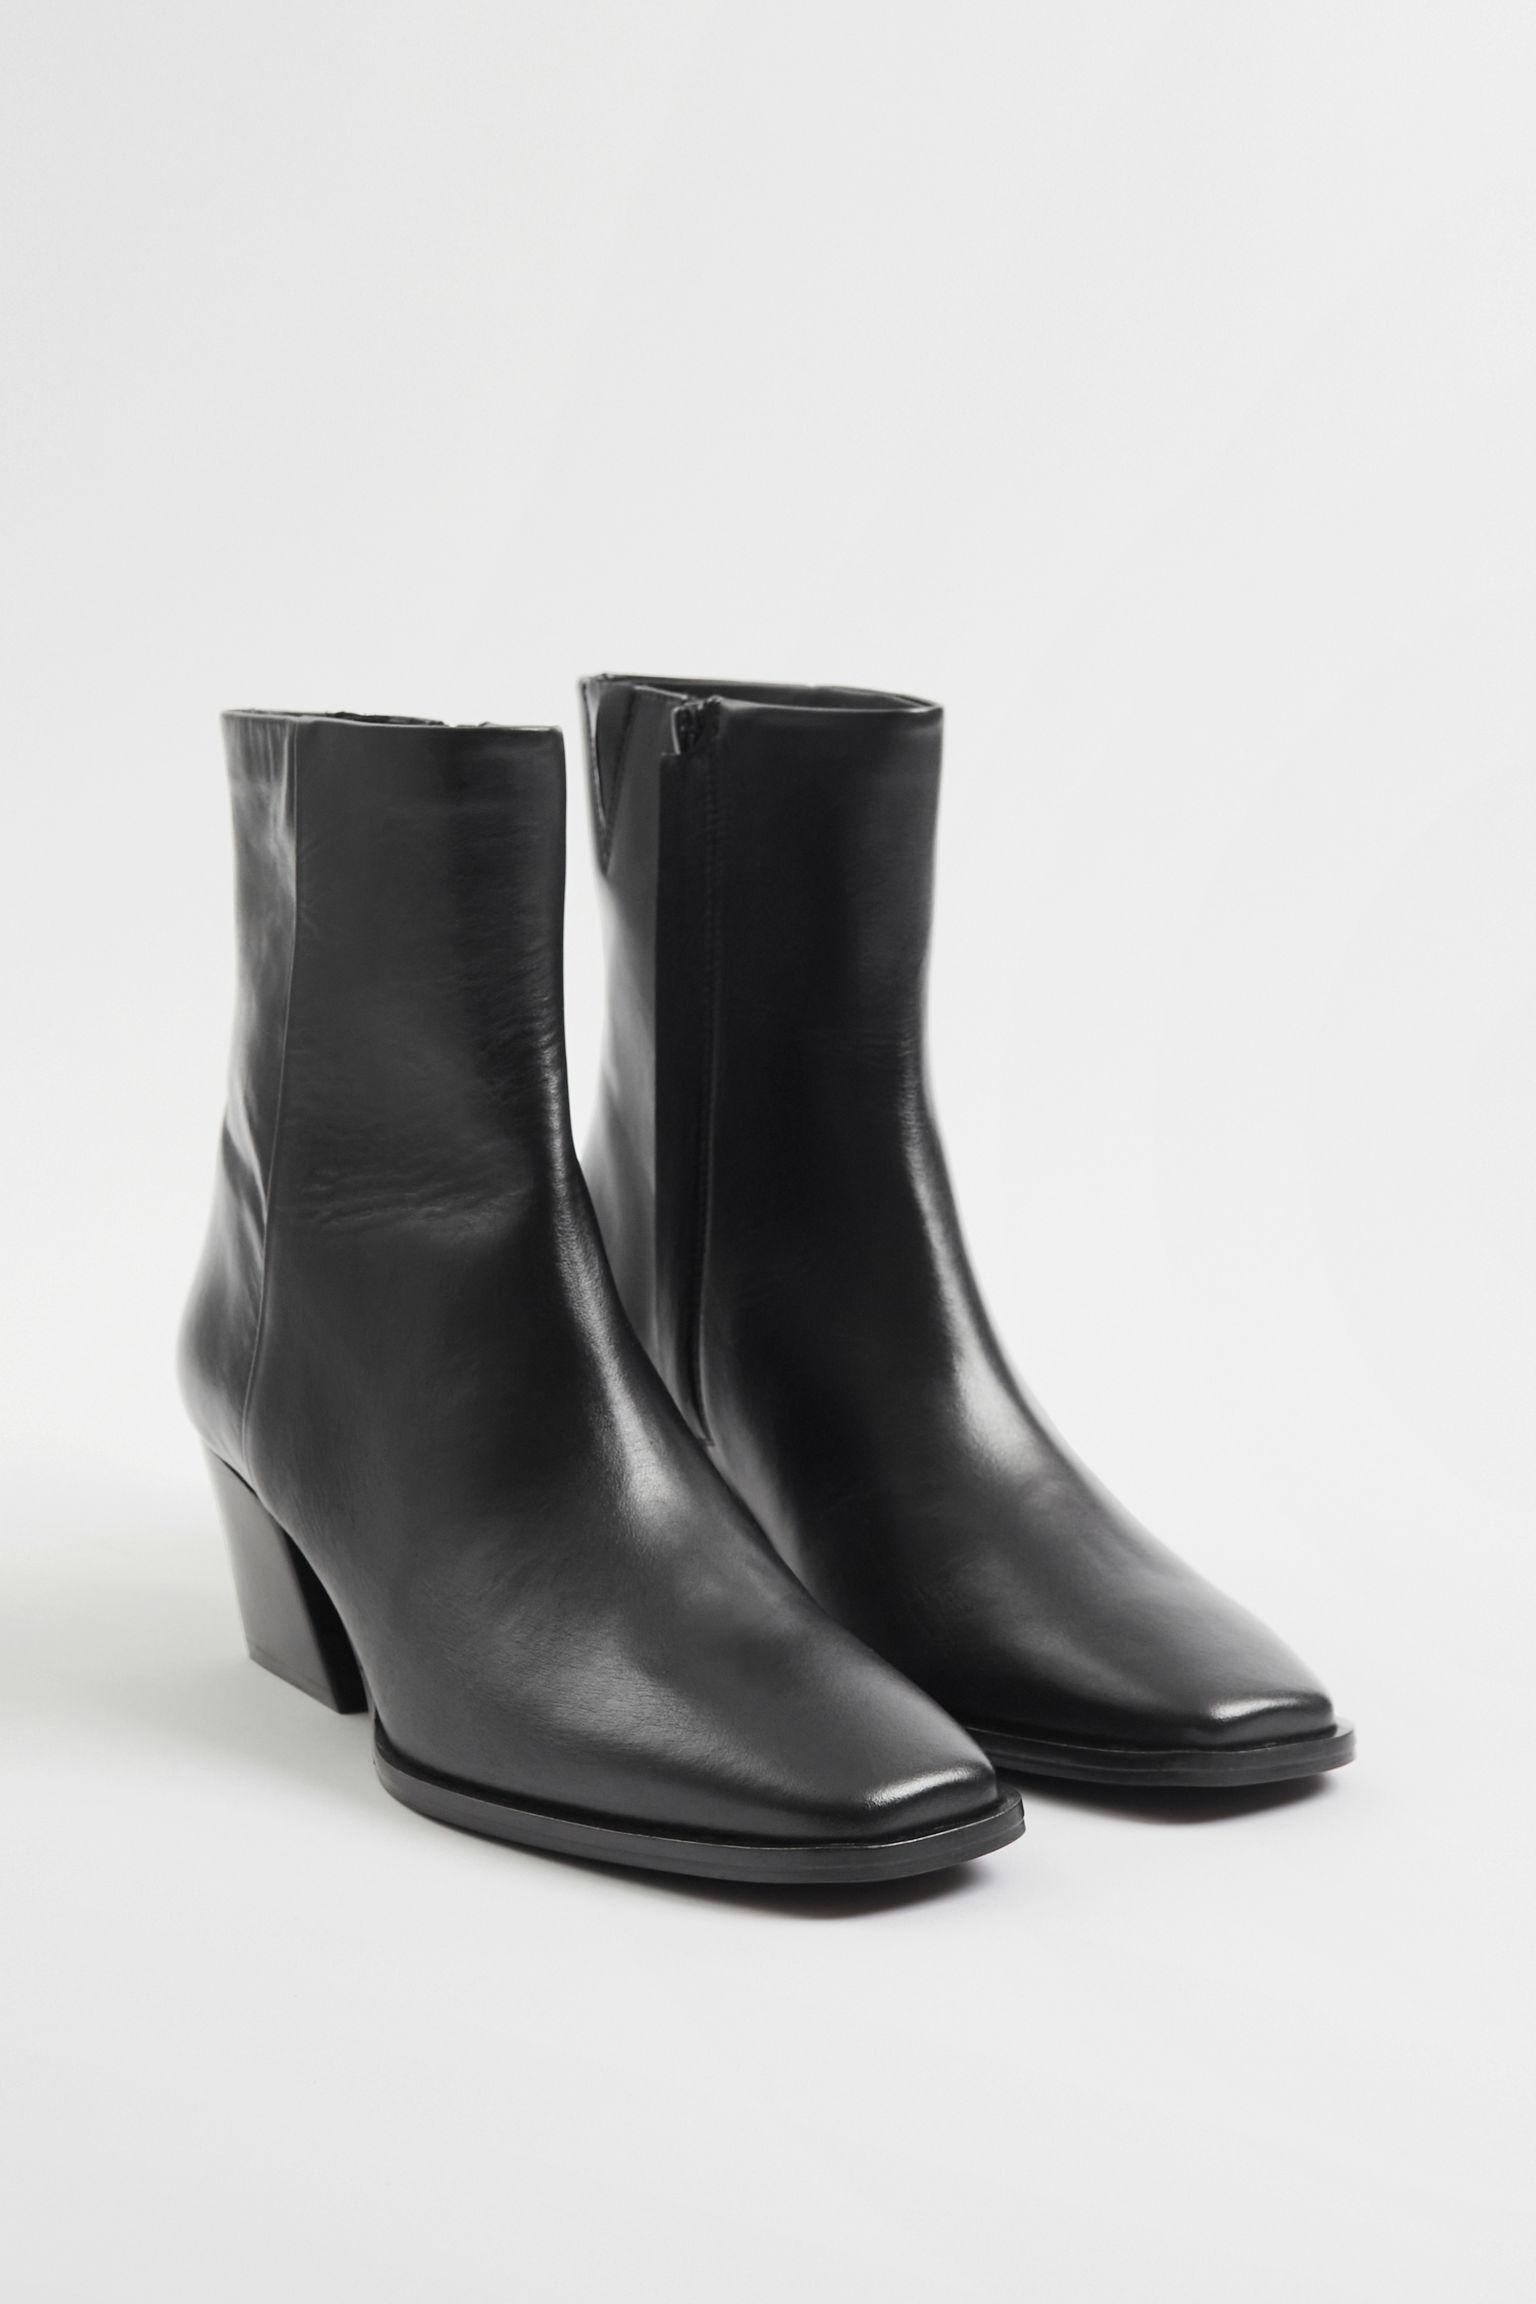 H&M Western Leather Ankle Boots in Black | Lyst Canada